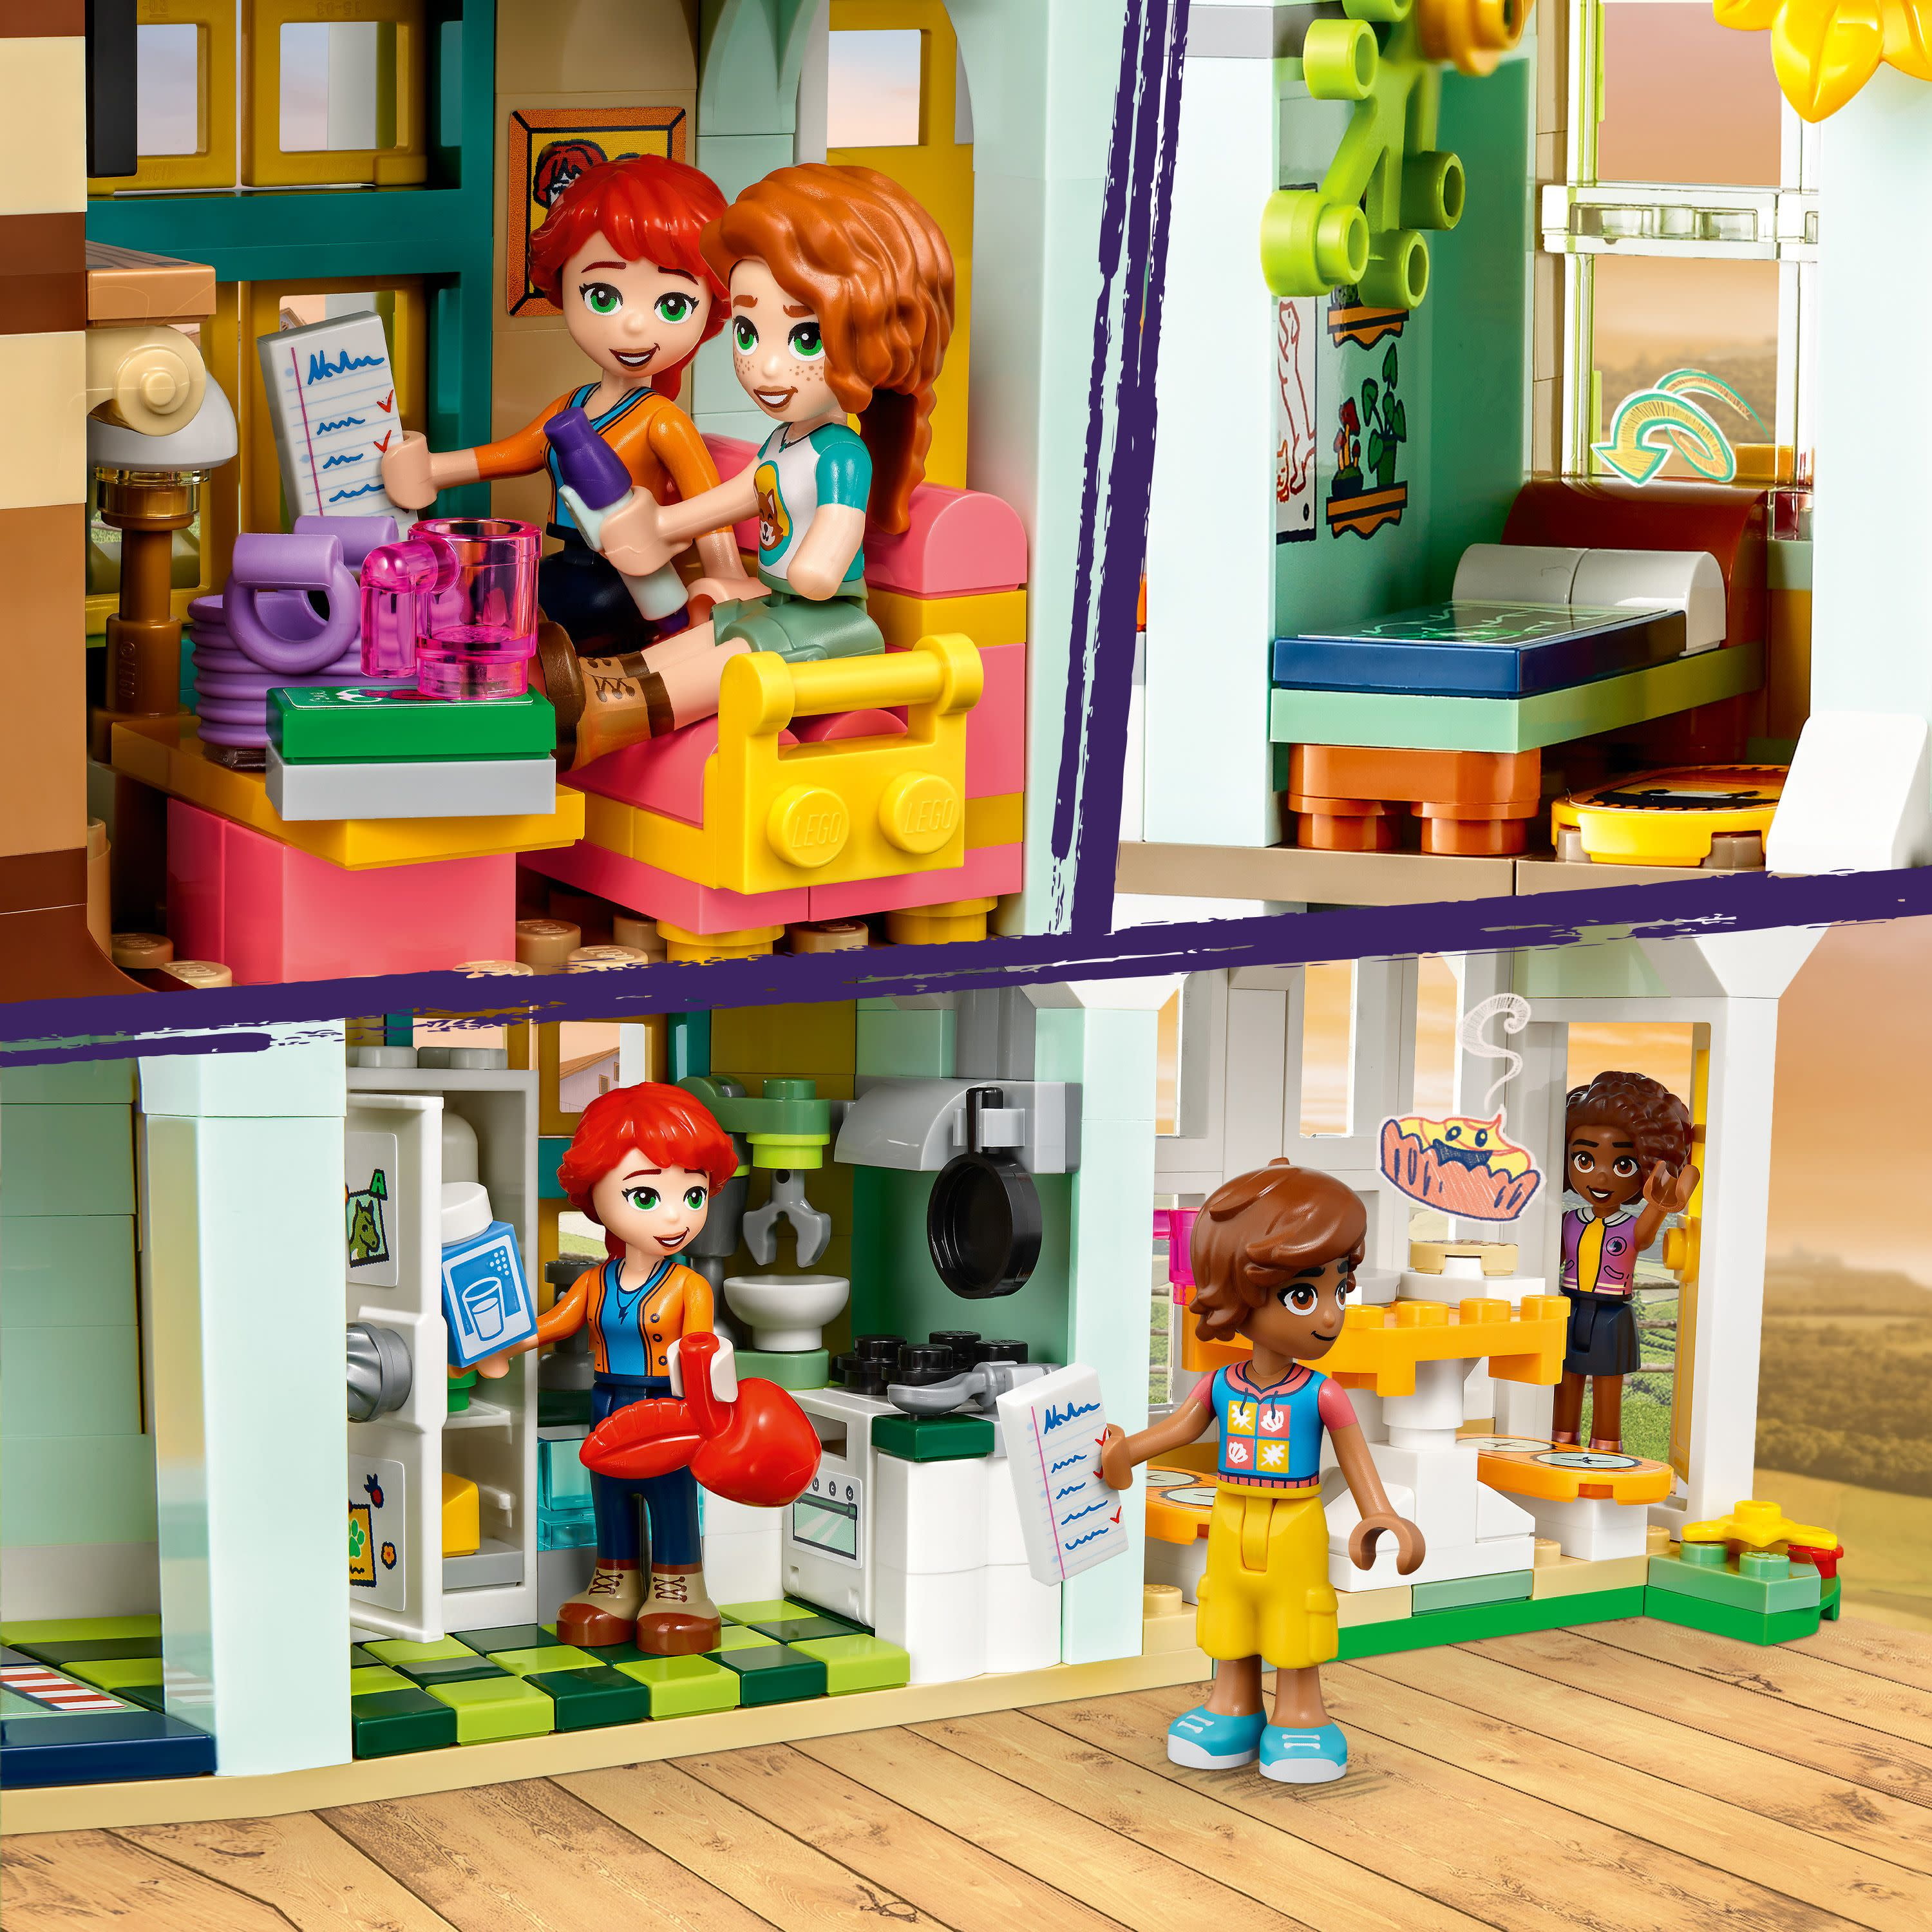 Autumn's House 41730 | Friends | Buy online at the Official LEGO® Shop US